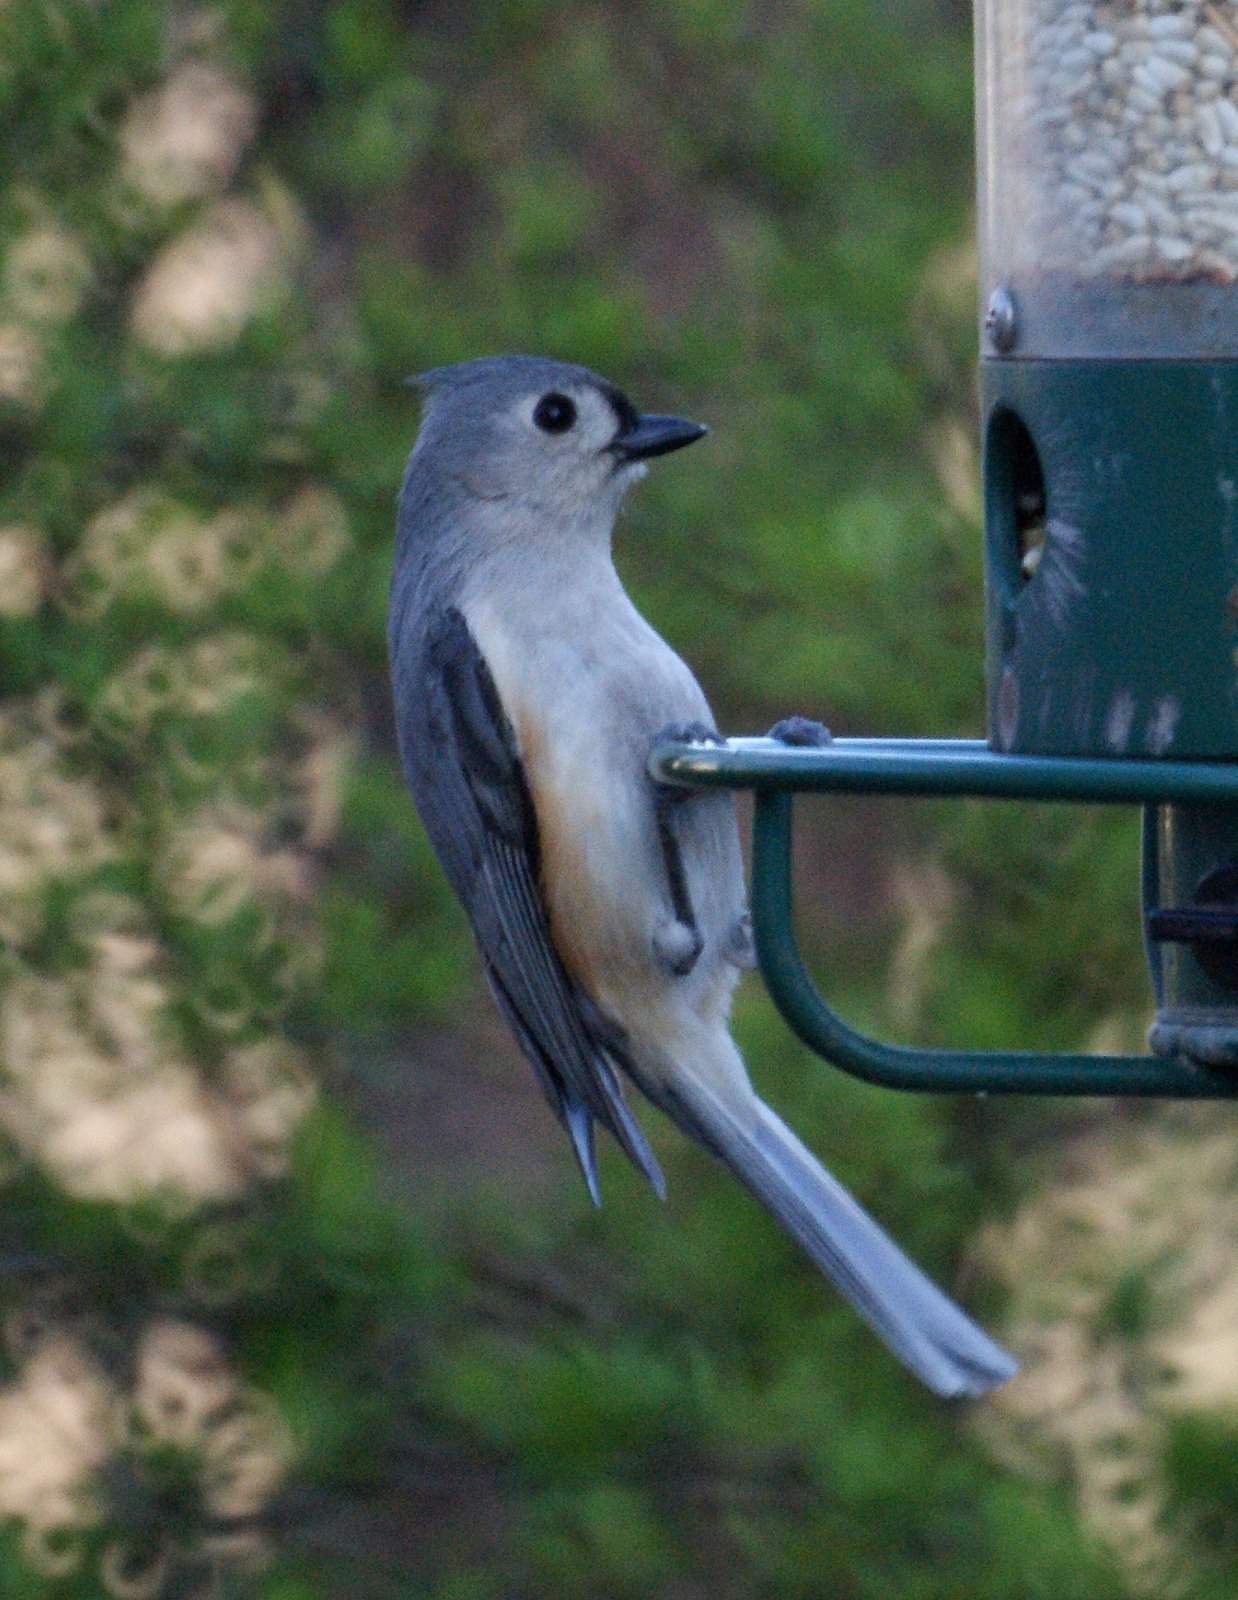 miketes: Common Backyard Birds in New Jersey in the Spring